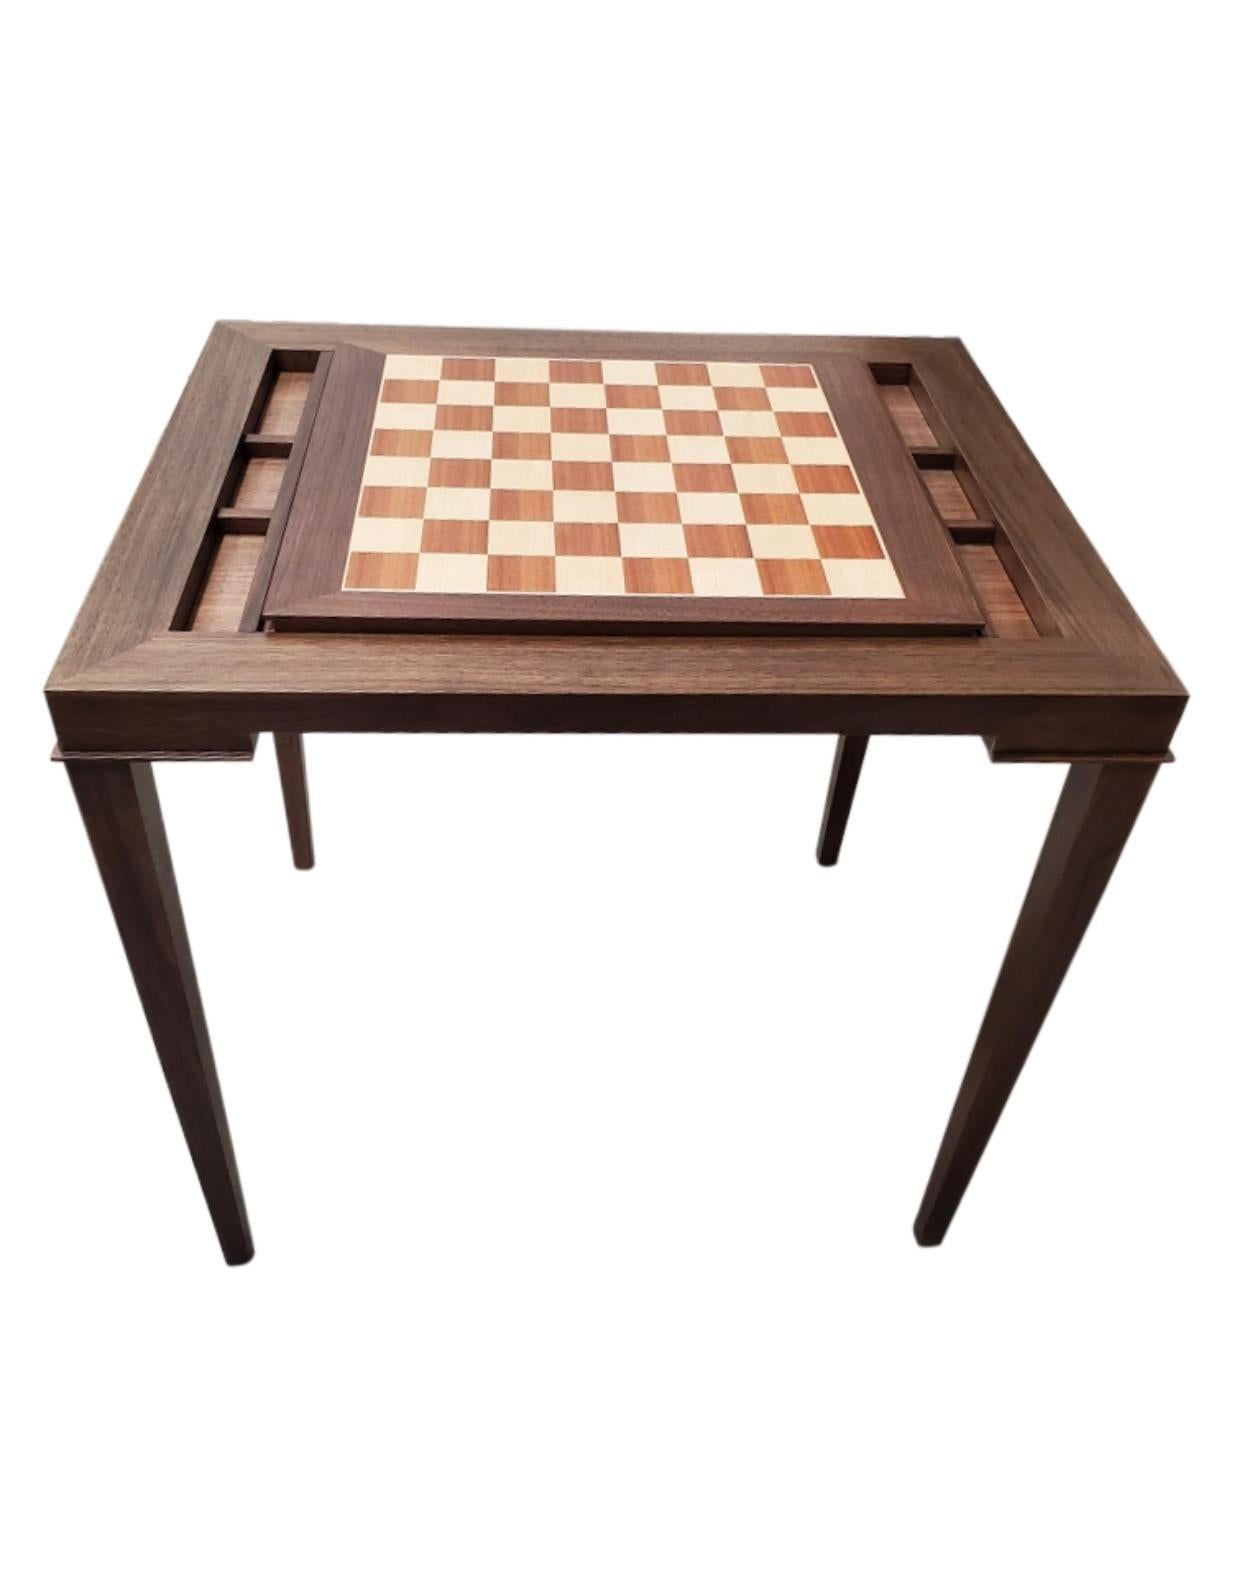 Custom walnut and mahogany backgammon table that converts to chess with a slide out board.

New production. Made to order in walnut and mahogany. Designed and made in NYC, each table is handcrafted within NYC and has unique attributes. One-day